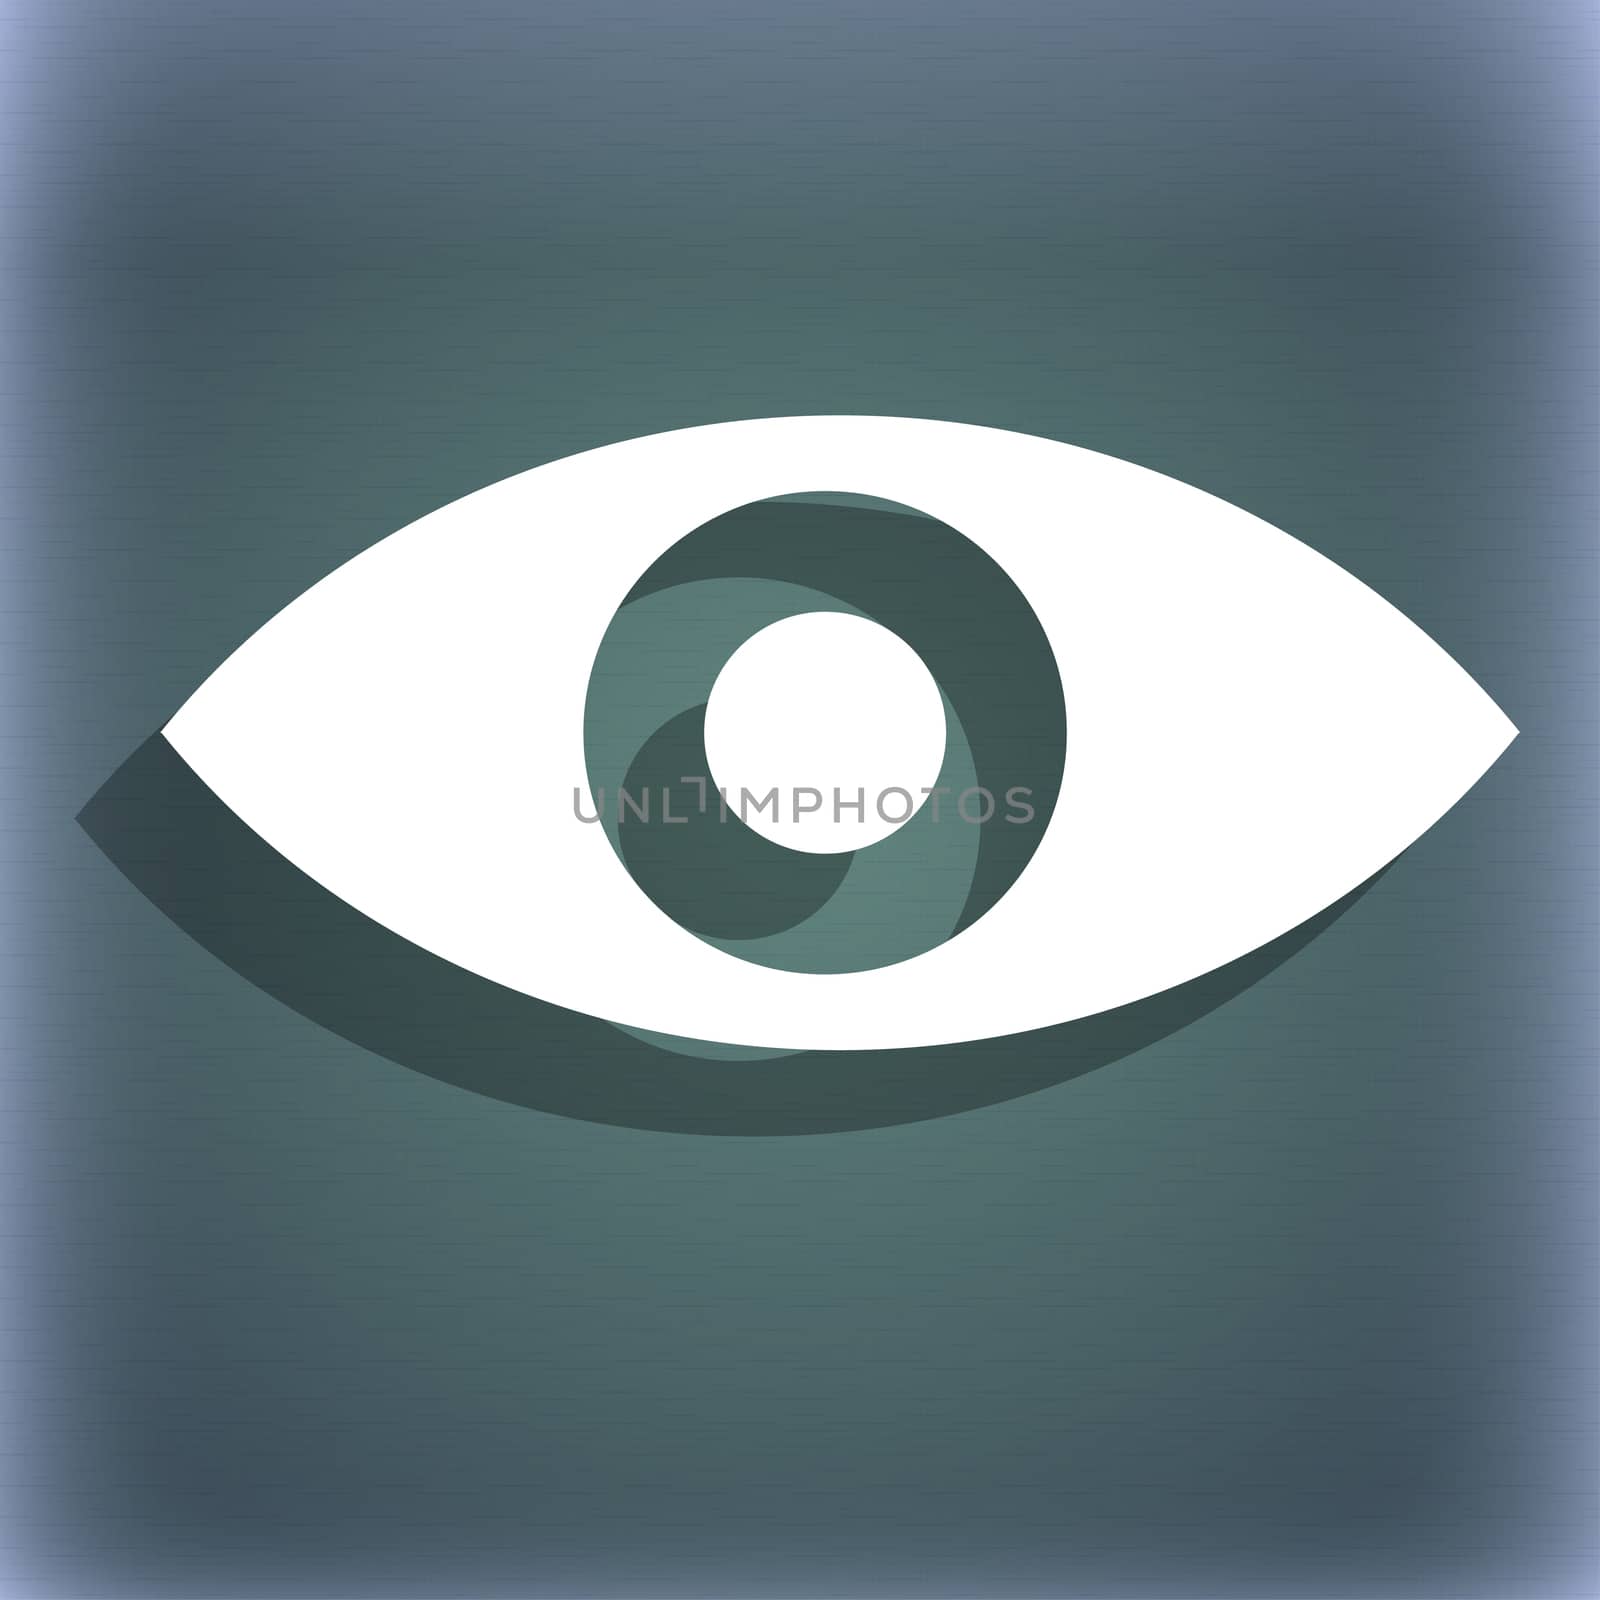 Eye, Publish content, sixth sense, intuition icon symbol on the blue-green abstract background with shadow and space for your text.  by serhii_lohvyniuk